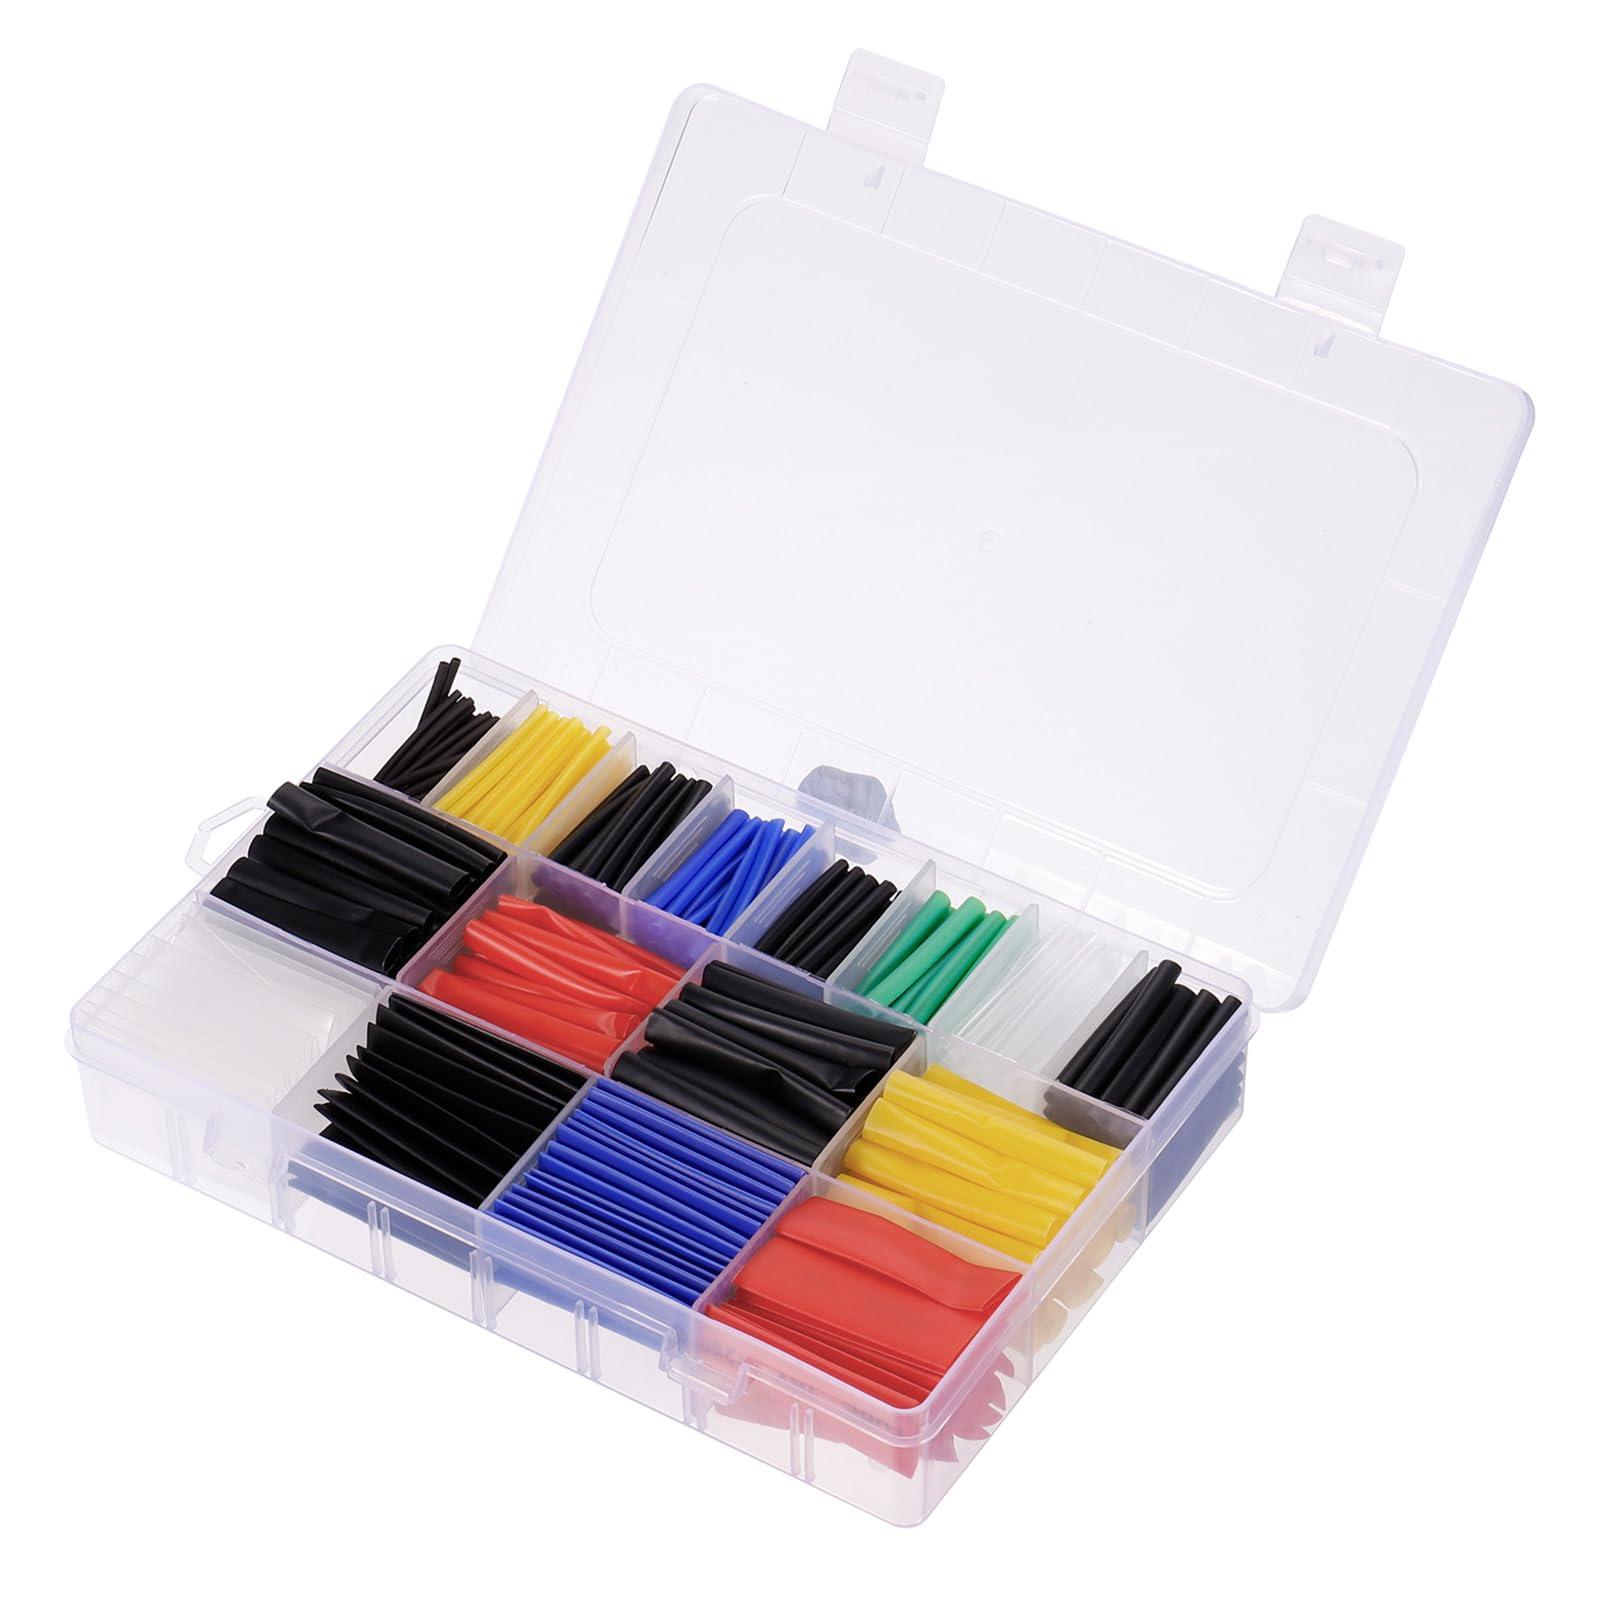 sourcing map 580pcs Heat Shrink Tubing Kit 2:1 Heat Shrink Tube 1mm/1.5mm/2mm/2.5mm/3mm/3.5mm/4mm/5mm/6mm/8mm/10mm for Electrical Cable Wrap Sleeving